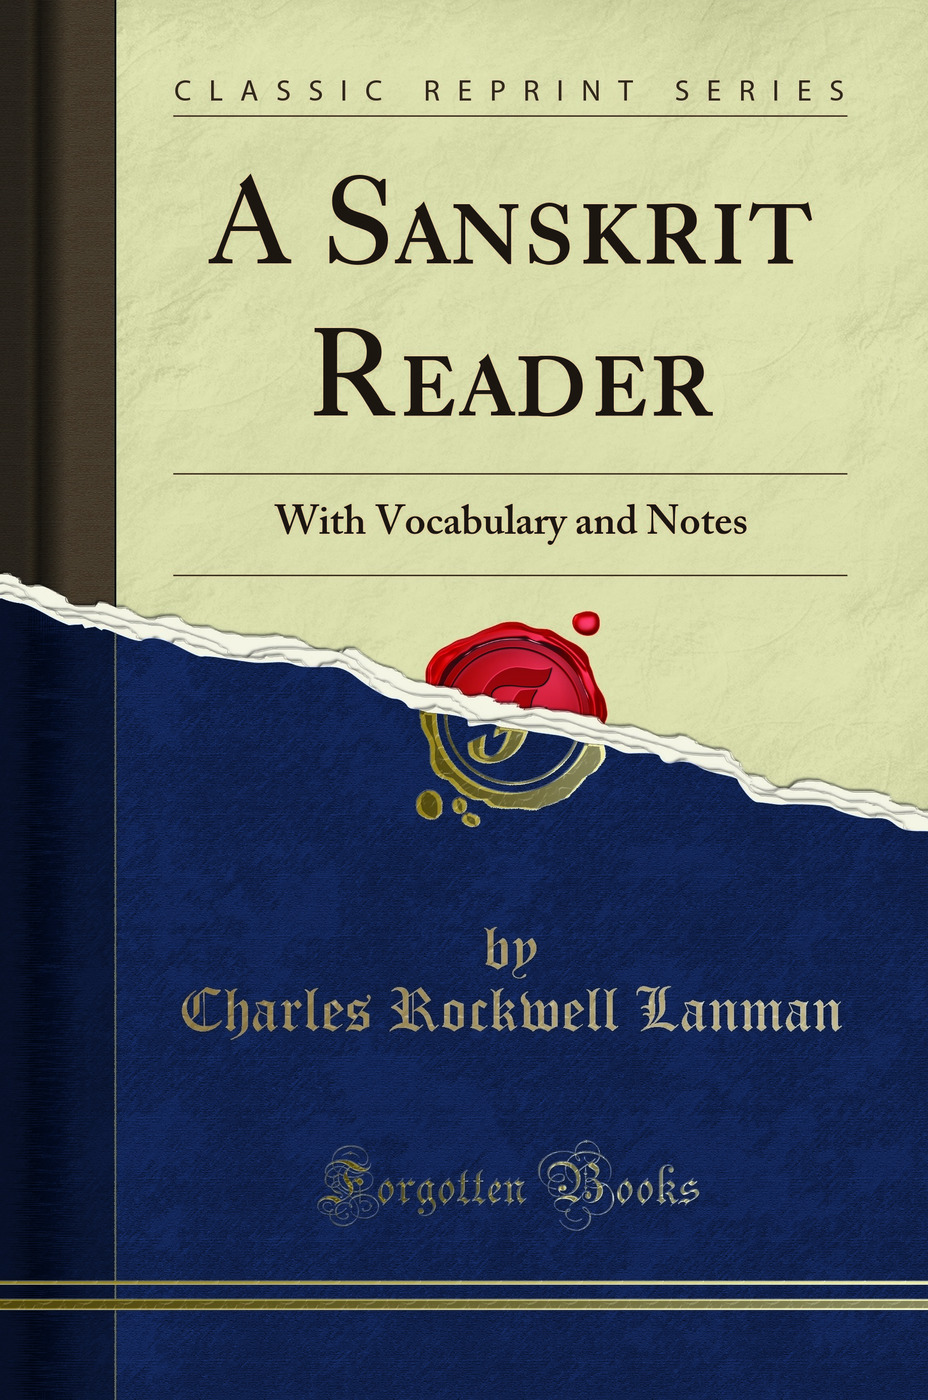 A Sanskrit Reader: With Vocabulary and Notes (Classic Reprint) - Charles Rockwell Lanman